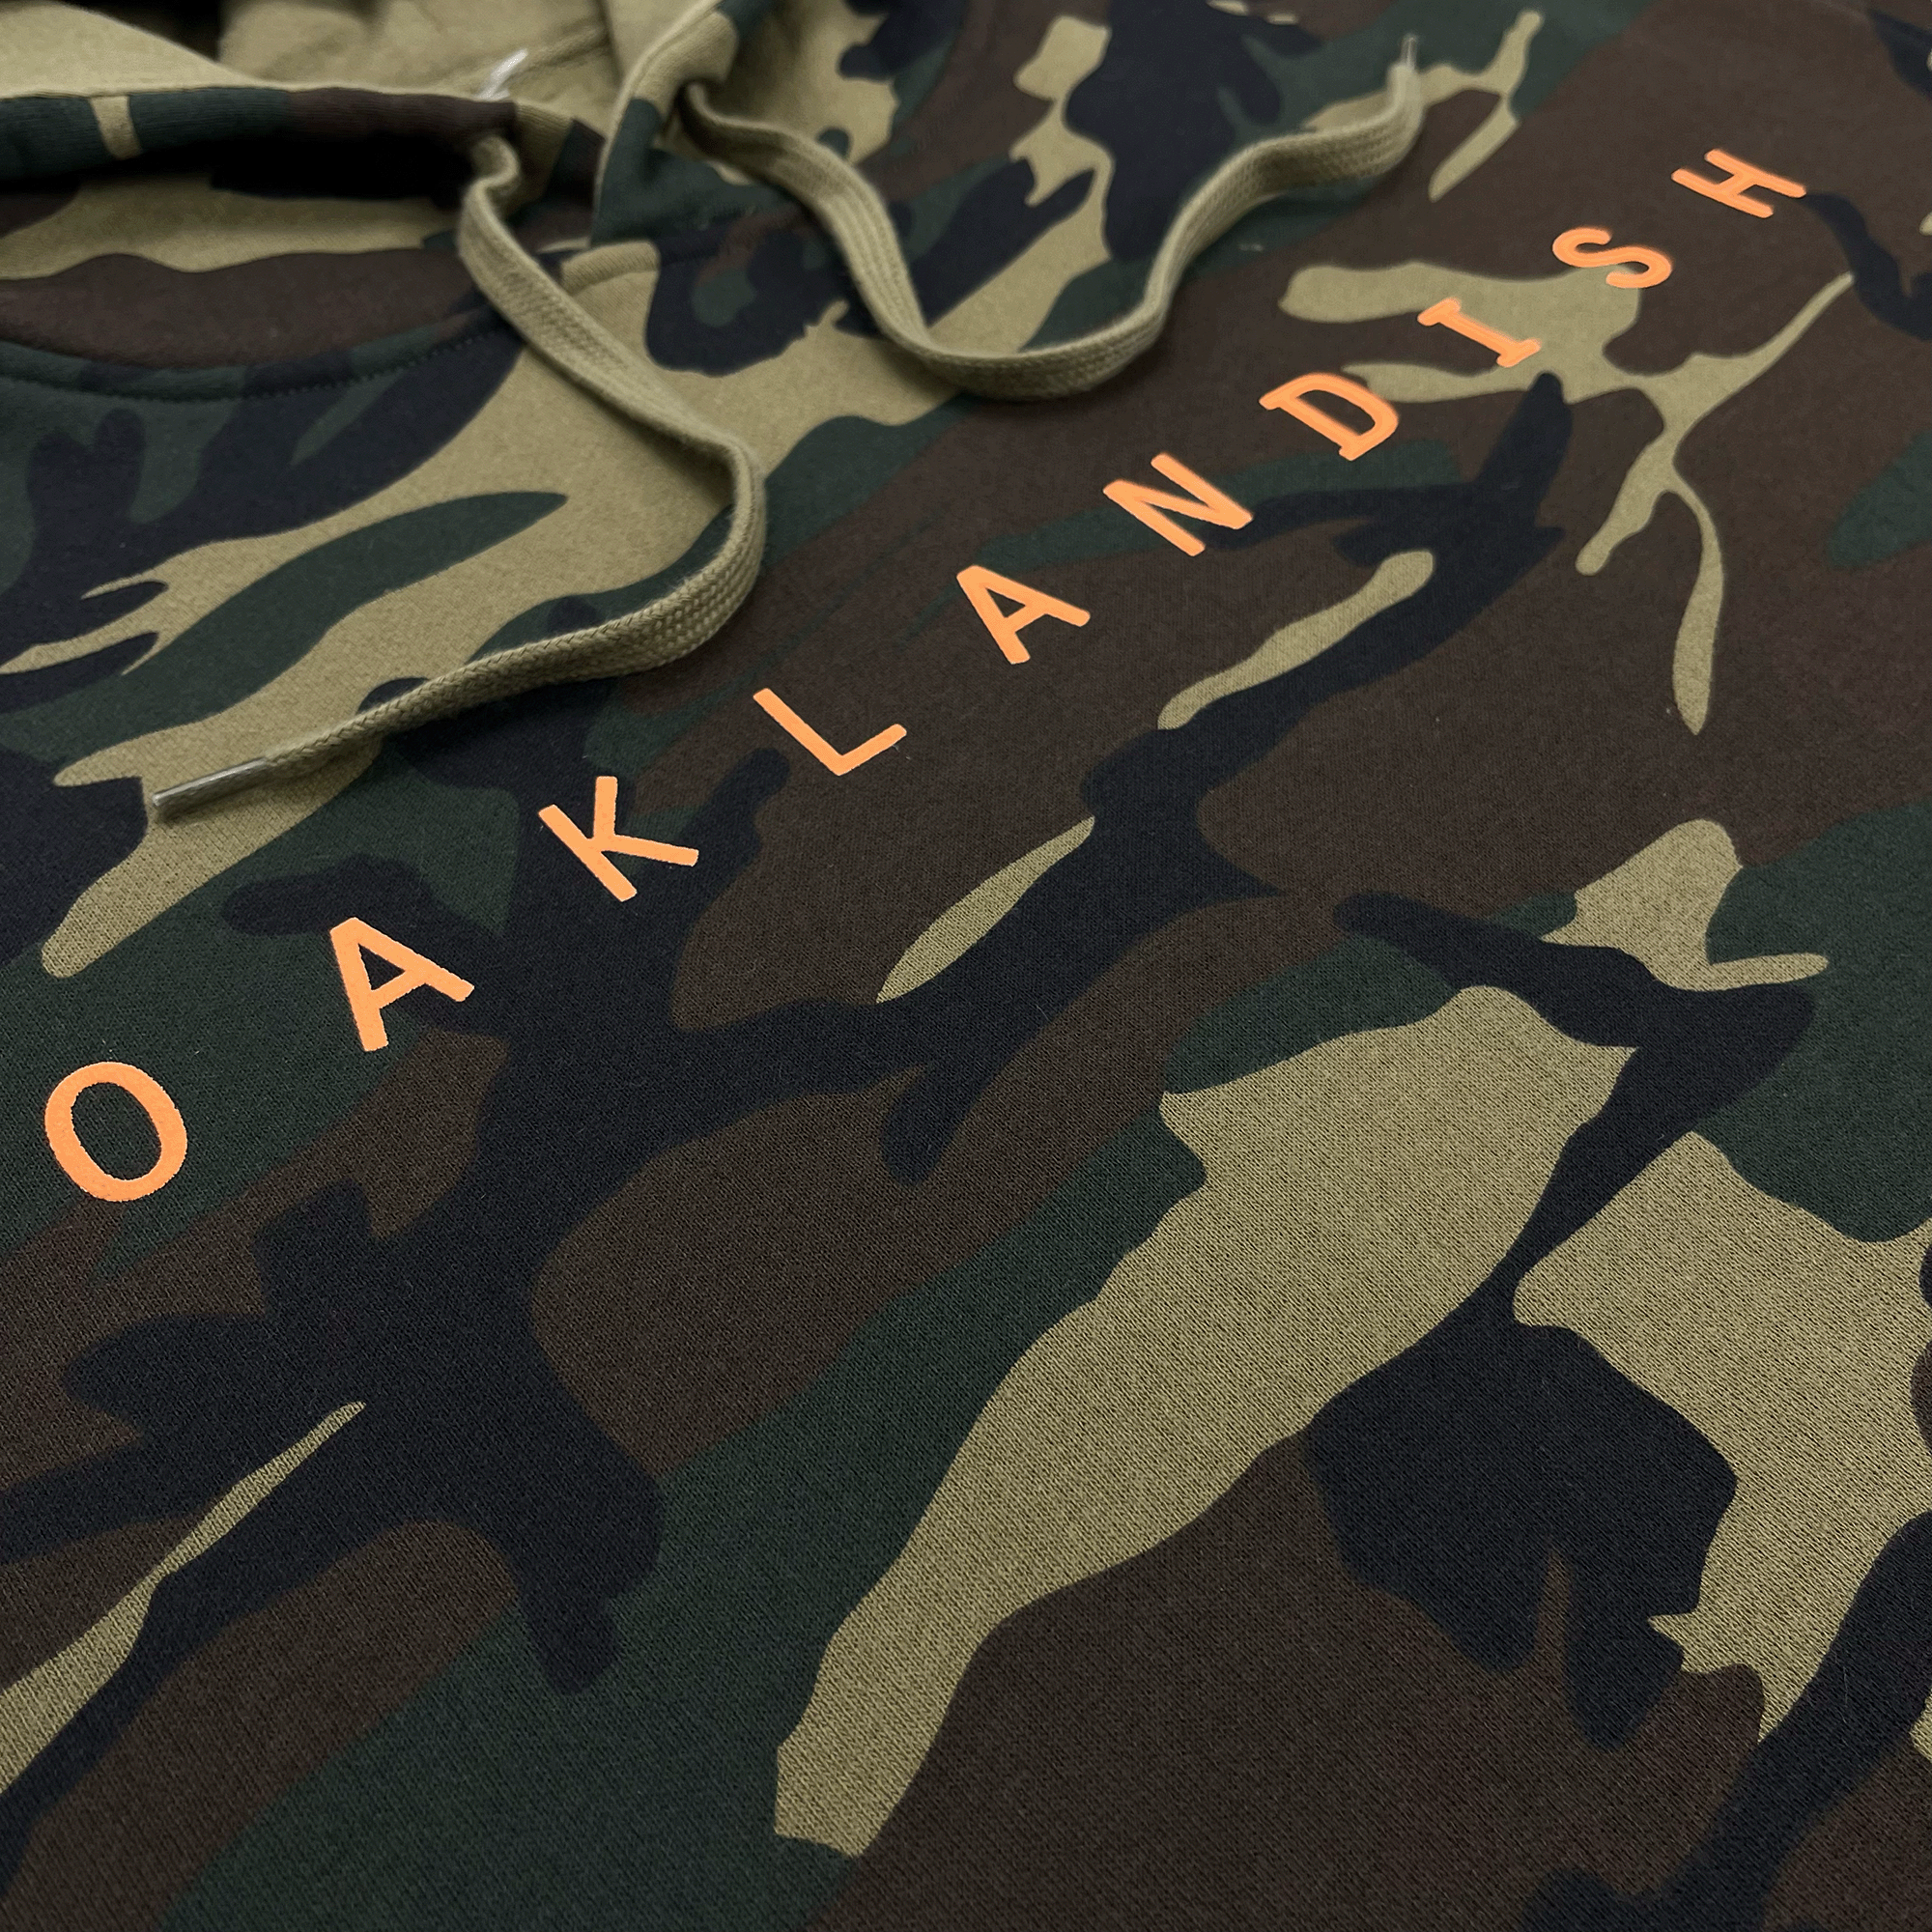 Large orange OAKLANDISH wordmark on the front chest on a camo pullover hoodie sweatshirt.